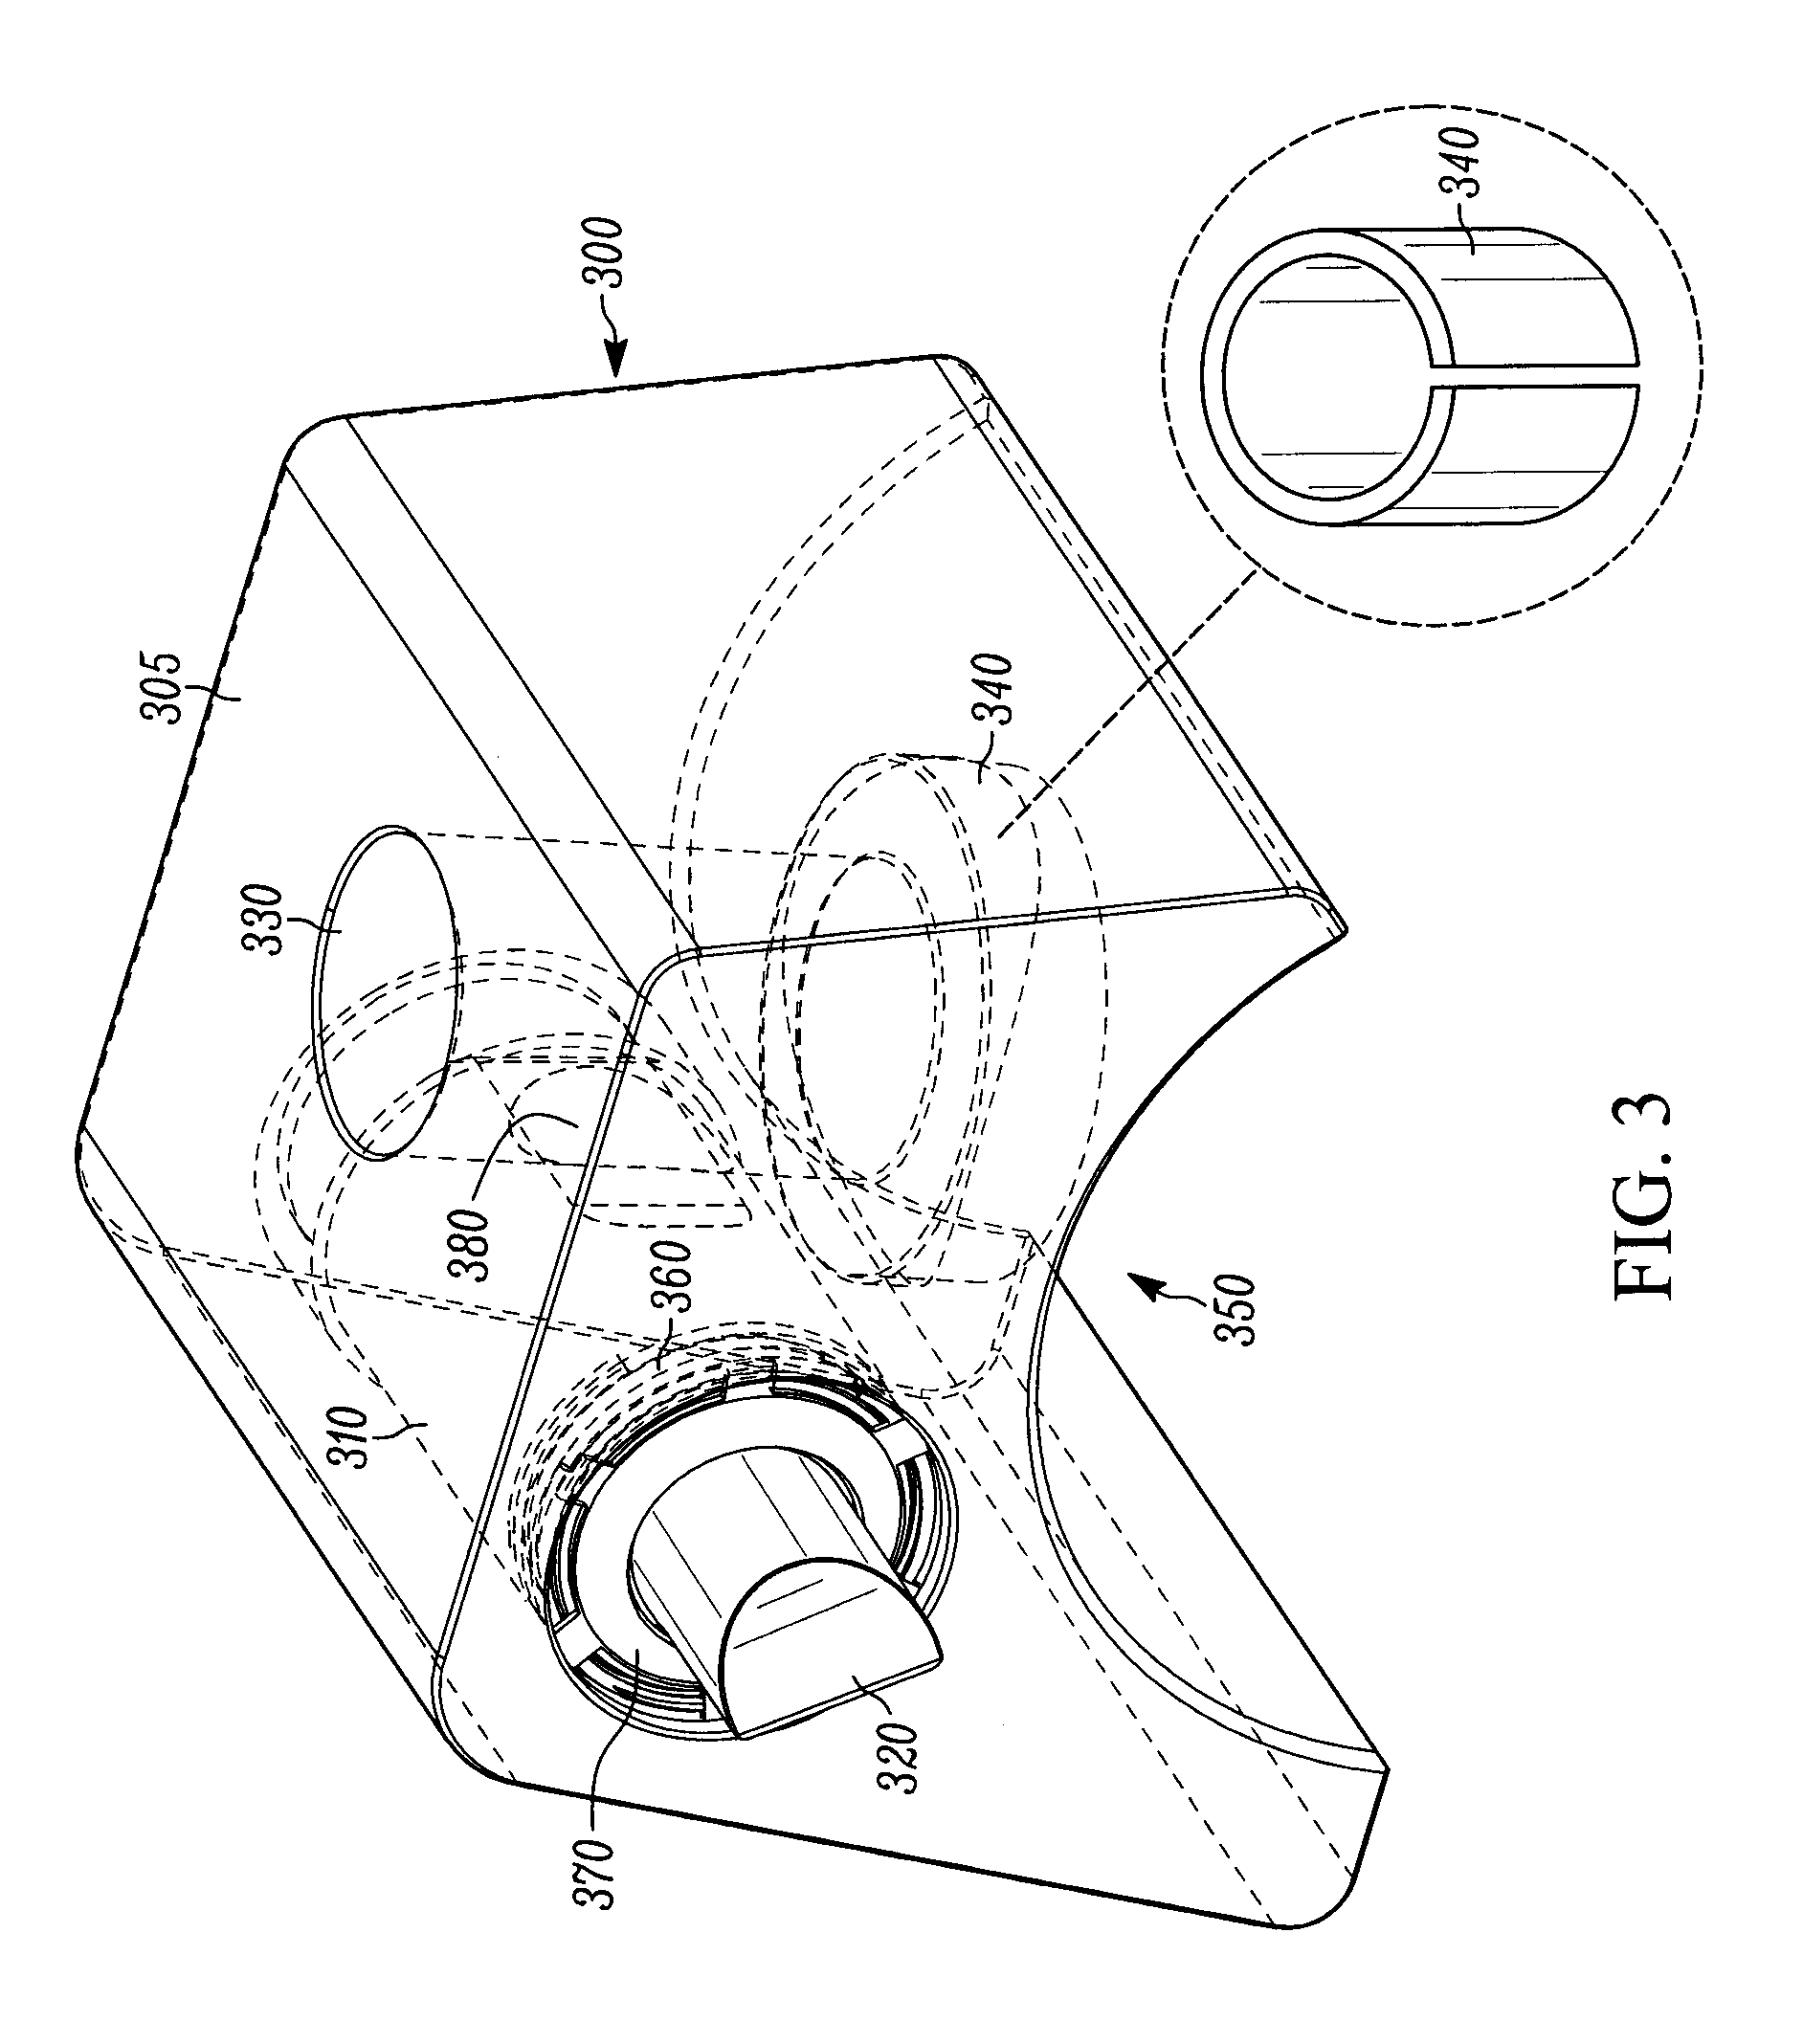 Rocker latch for controlling engine valve actuation